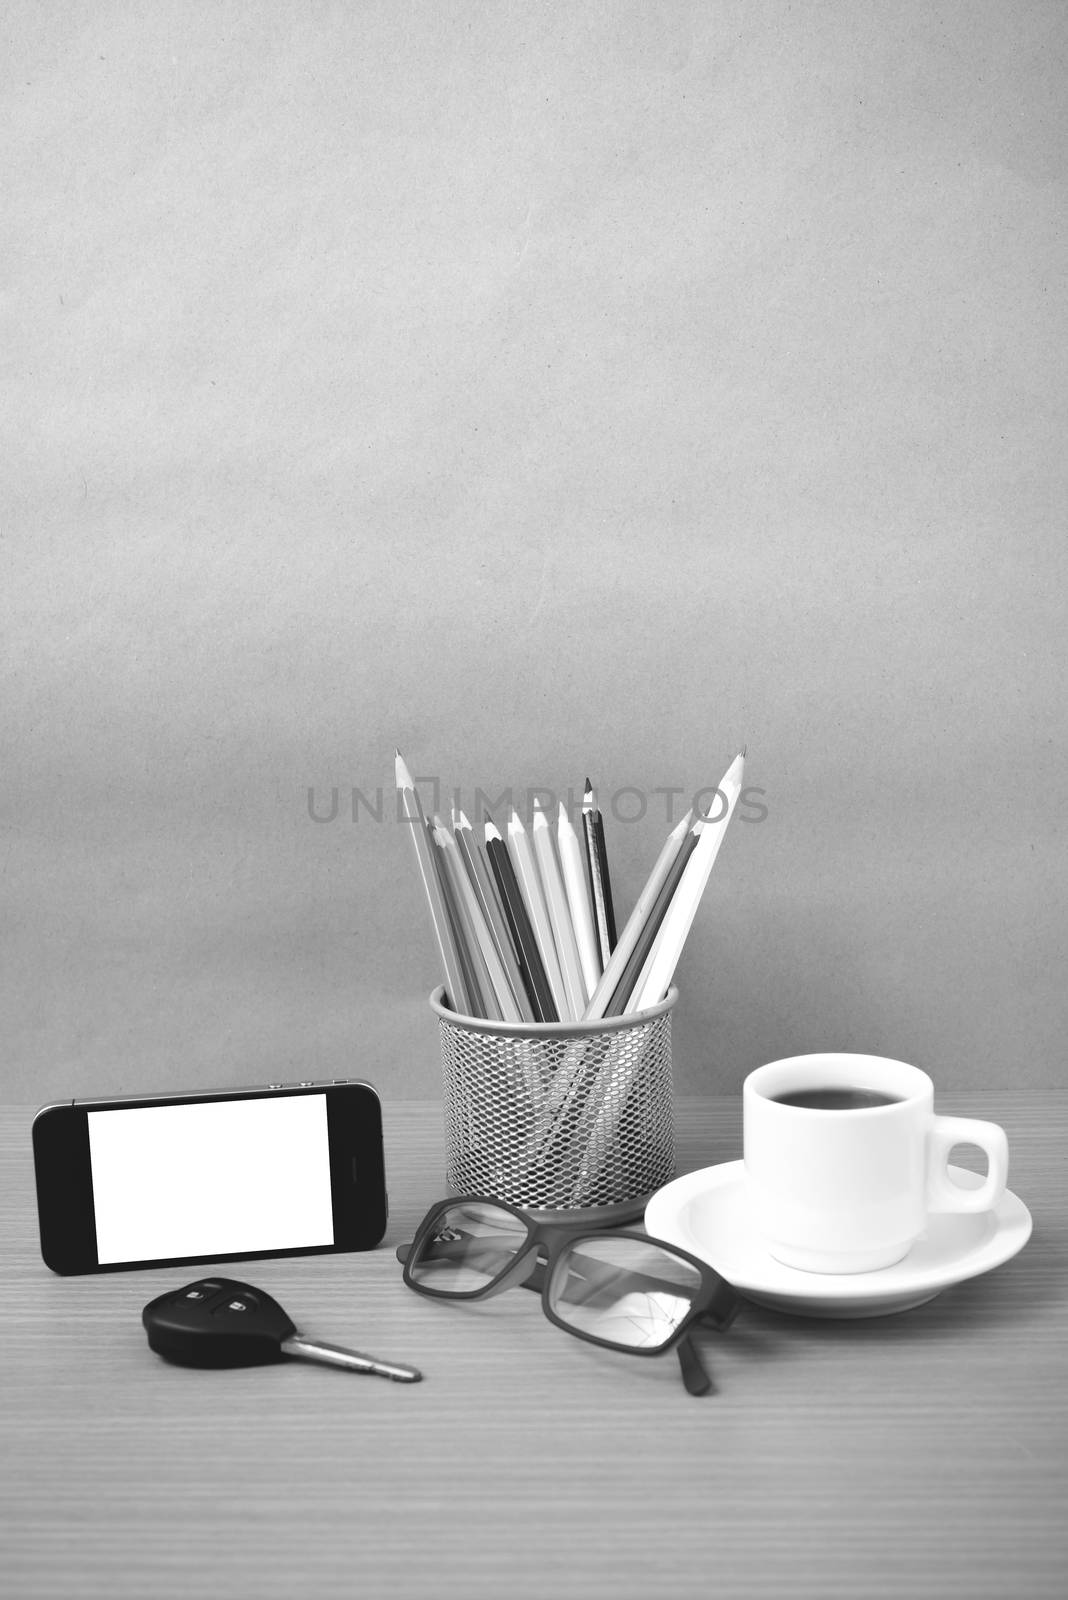 coffee,phone,eyeglasses,color pencil and car key by ammza12